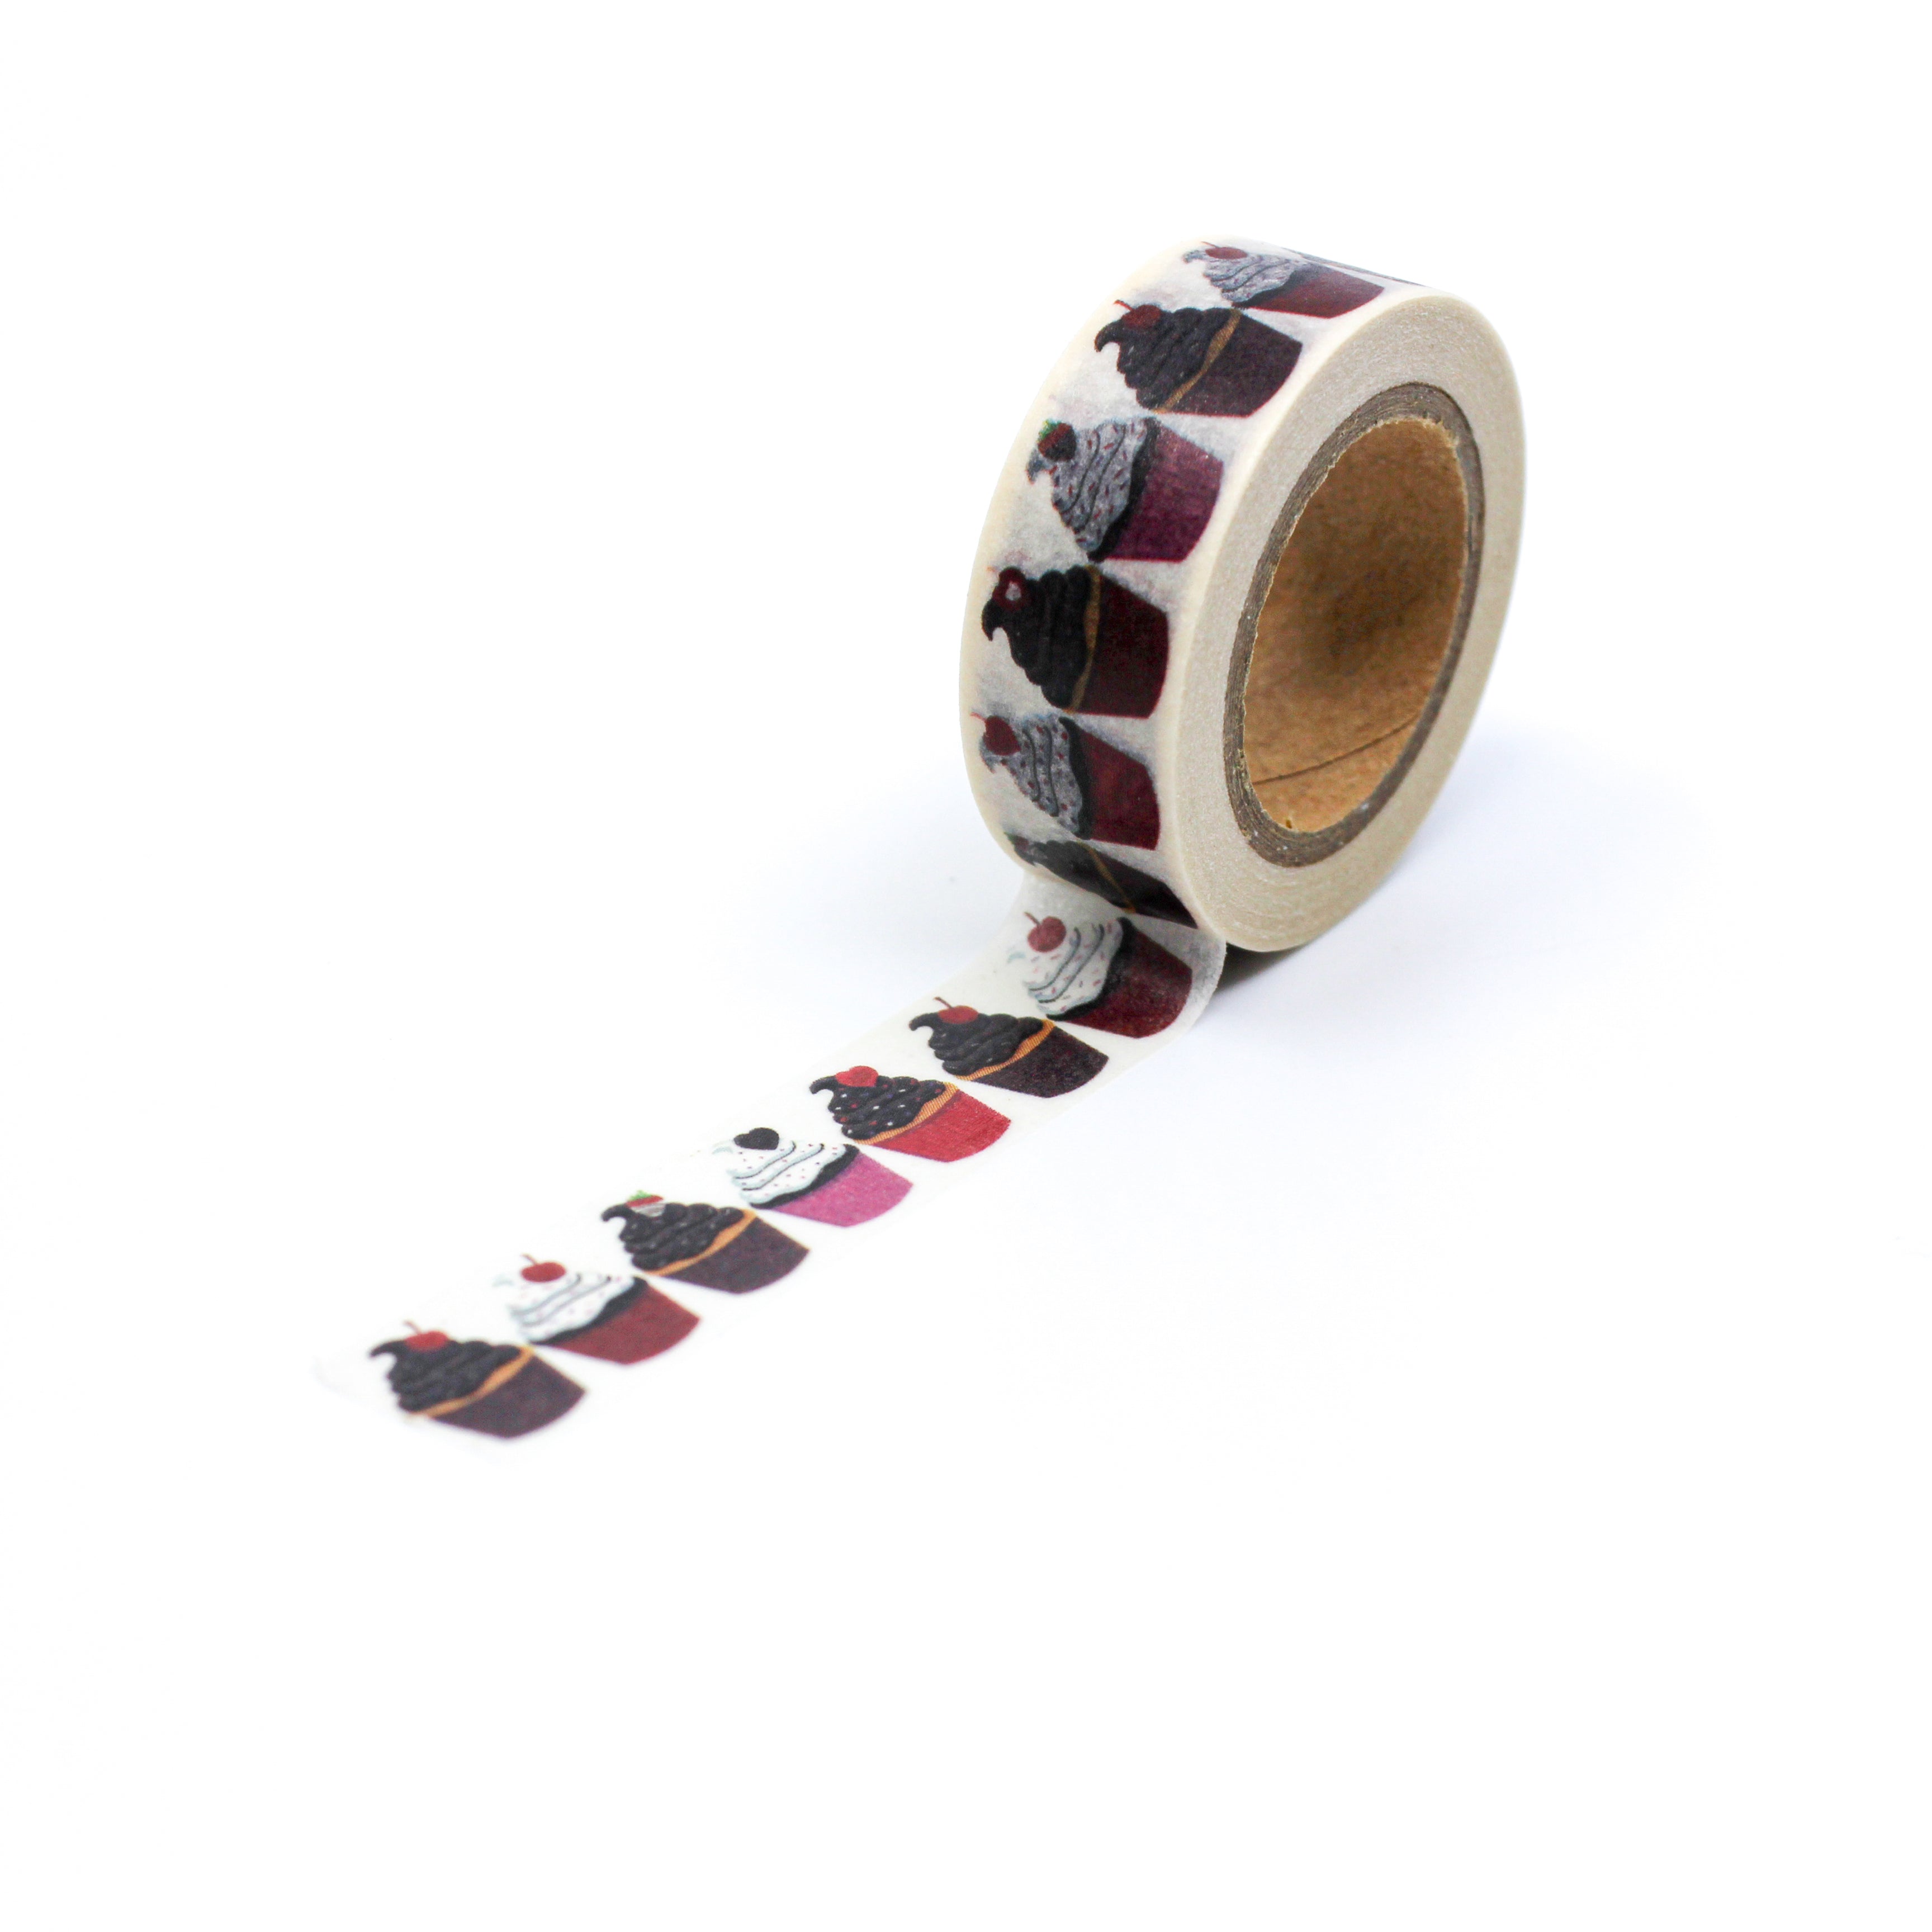 This is a full pattern repeat view of chocolate cupcakes washi tape from BBB Supplies Craft Shop